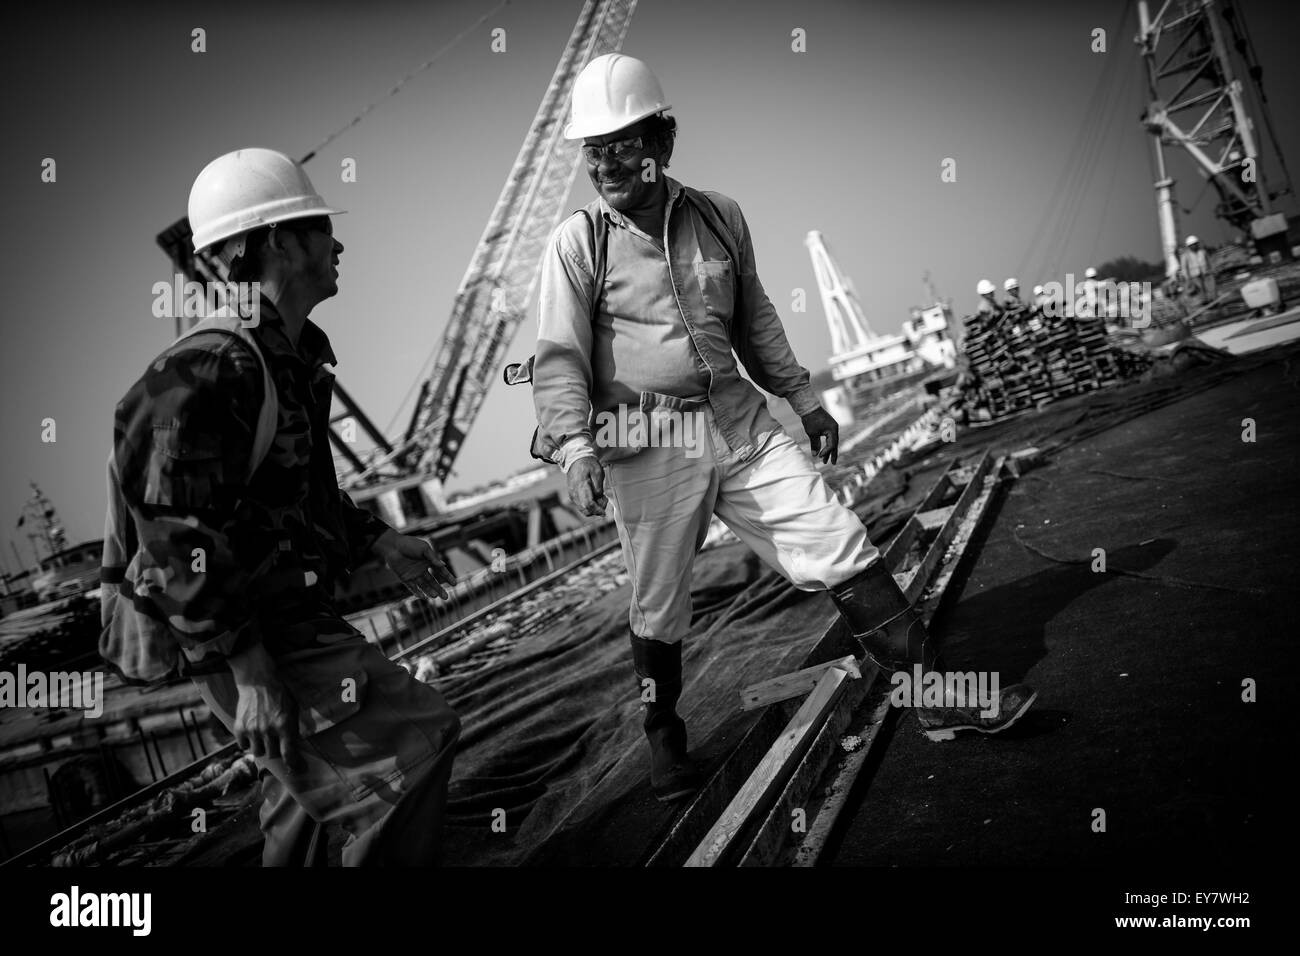 Tuxpan. 22nd July, 2015. Image taken on July 22, 2015 shows employees from China (L) and Mexico (R) working at the construction site of the Tuxpan Port Terminal in Tuxpan city, Veracruz state, Mexico. Around 90 employees from China and 100 from Mexico have been working for a year in the construction site of the port terminal for containers, vehicles and agricultural material. This is the second construction project made by Chinese company with labor from Chinese and Mexican origins. © Pedro Mera/Xinhua/Alamy Live News Stock Photo